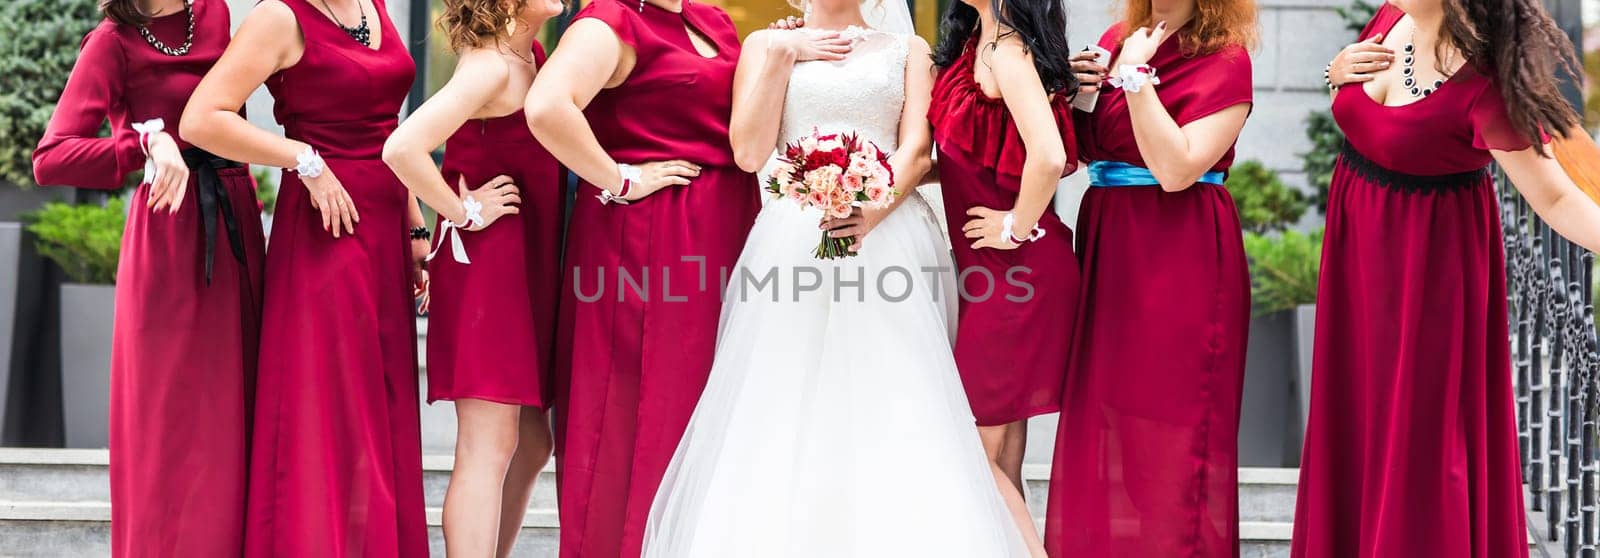 Bride with bridesmaids outdoors on the wedding day by Satura86